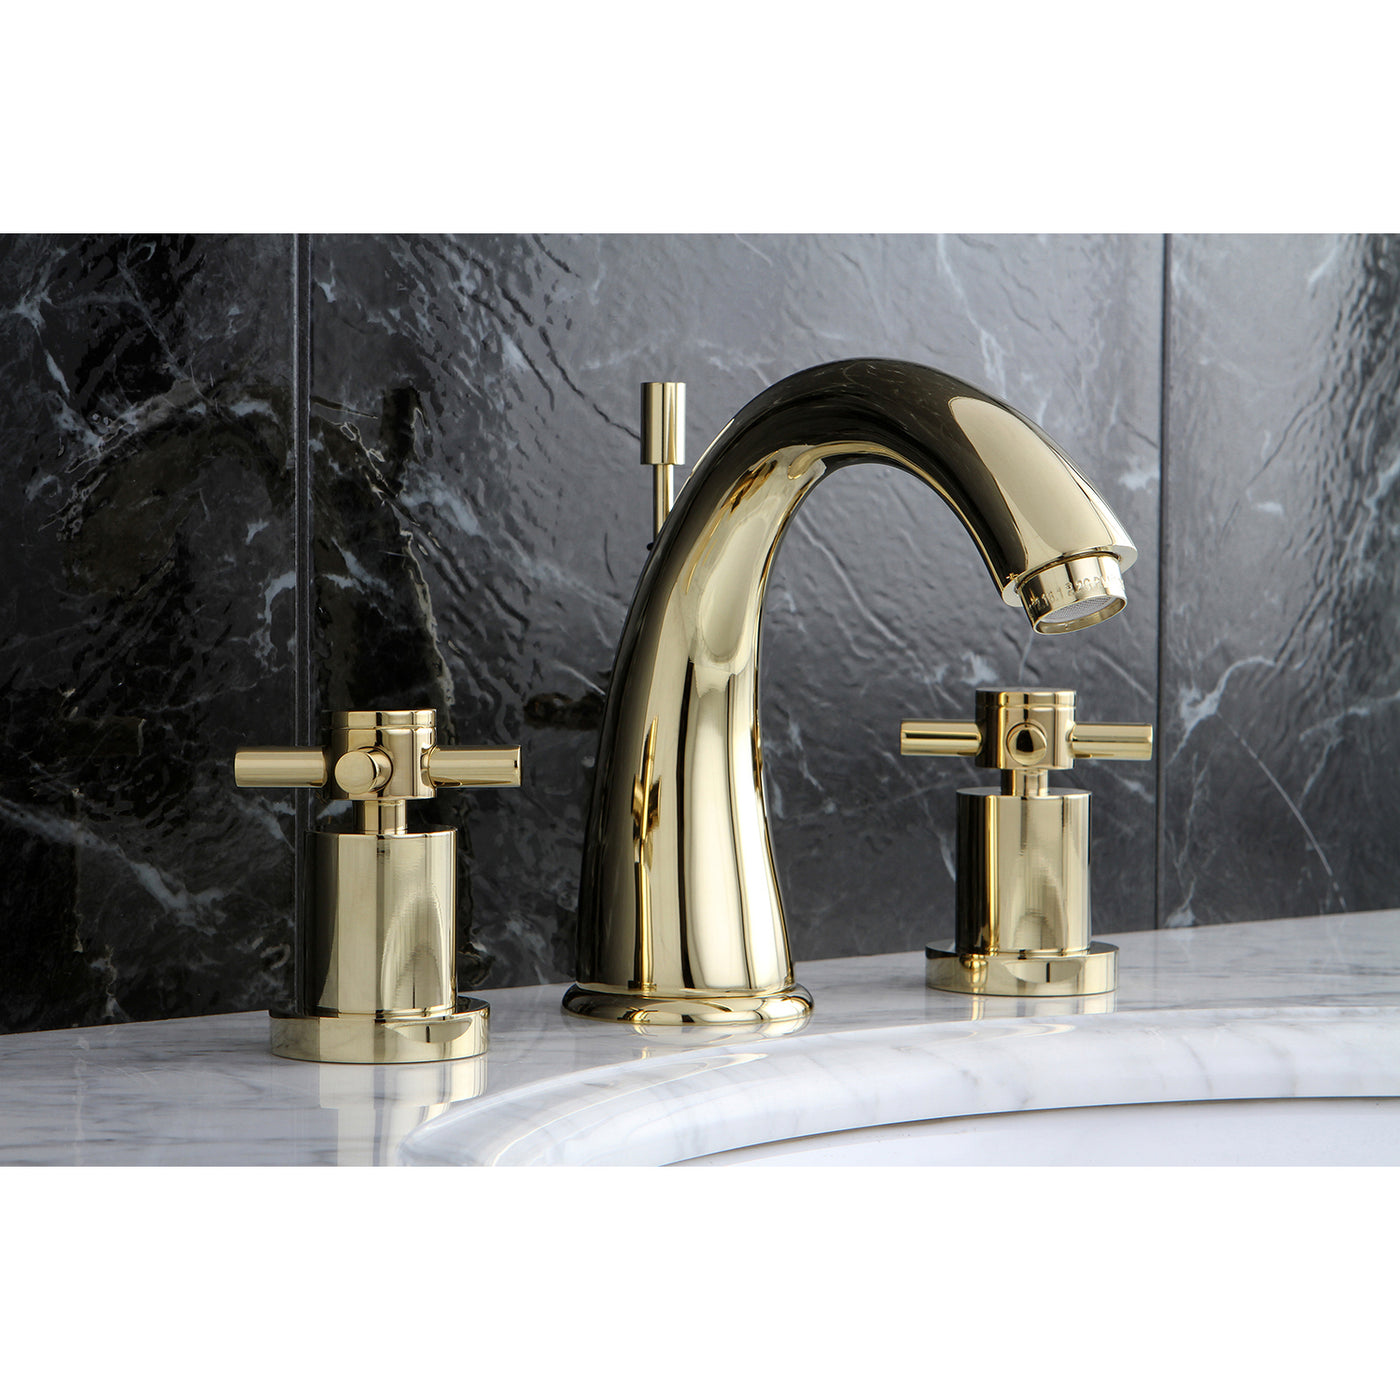 Elements of Design ES2962DX Widespread Bathroom Faucet with Brass Pop-Up, Polished Brass